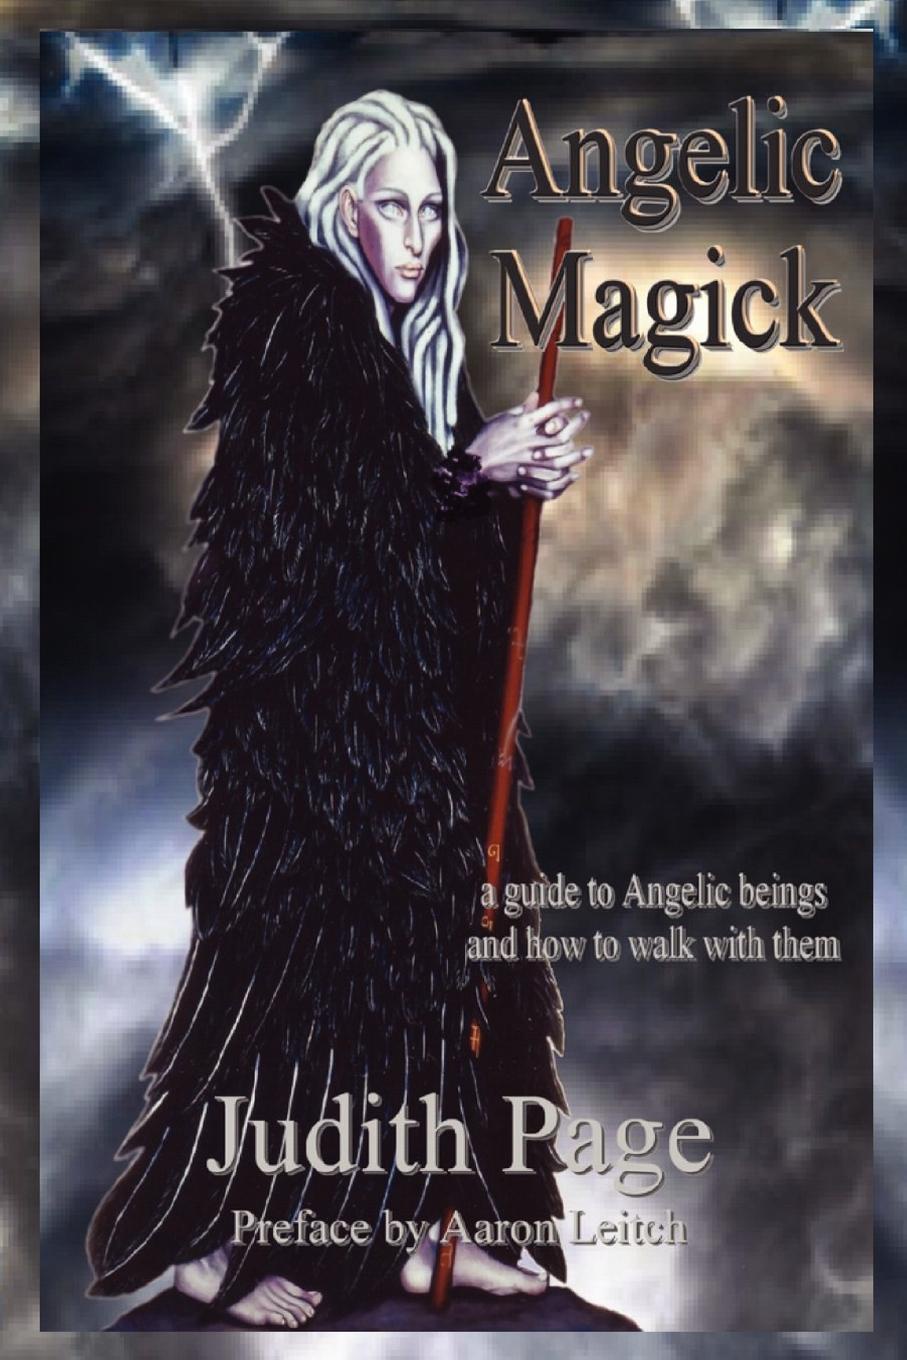 Angelic Magick. A Guide to Angelic Beings and How to Walk with Them